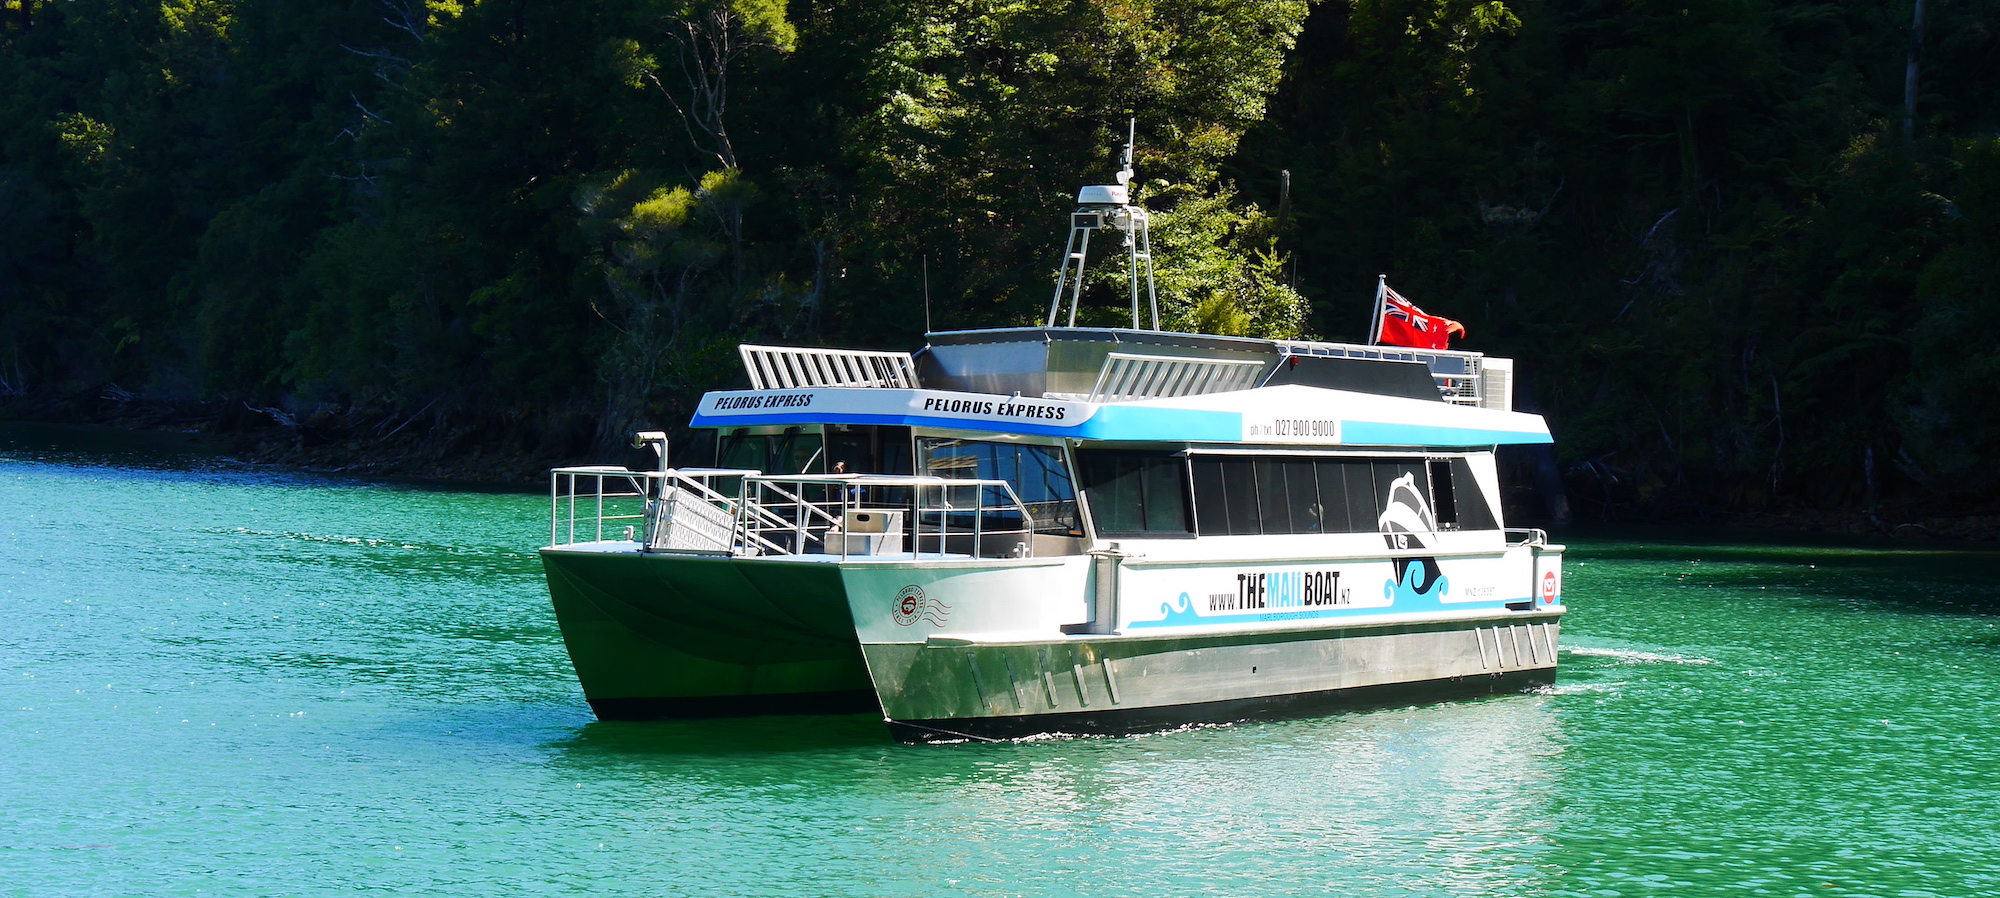 MV Pelorus Express, our the vessel for the Pelorus Mail Boat cruises.